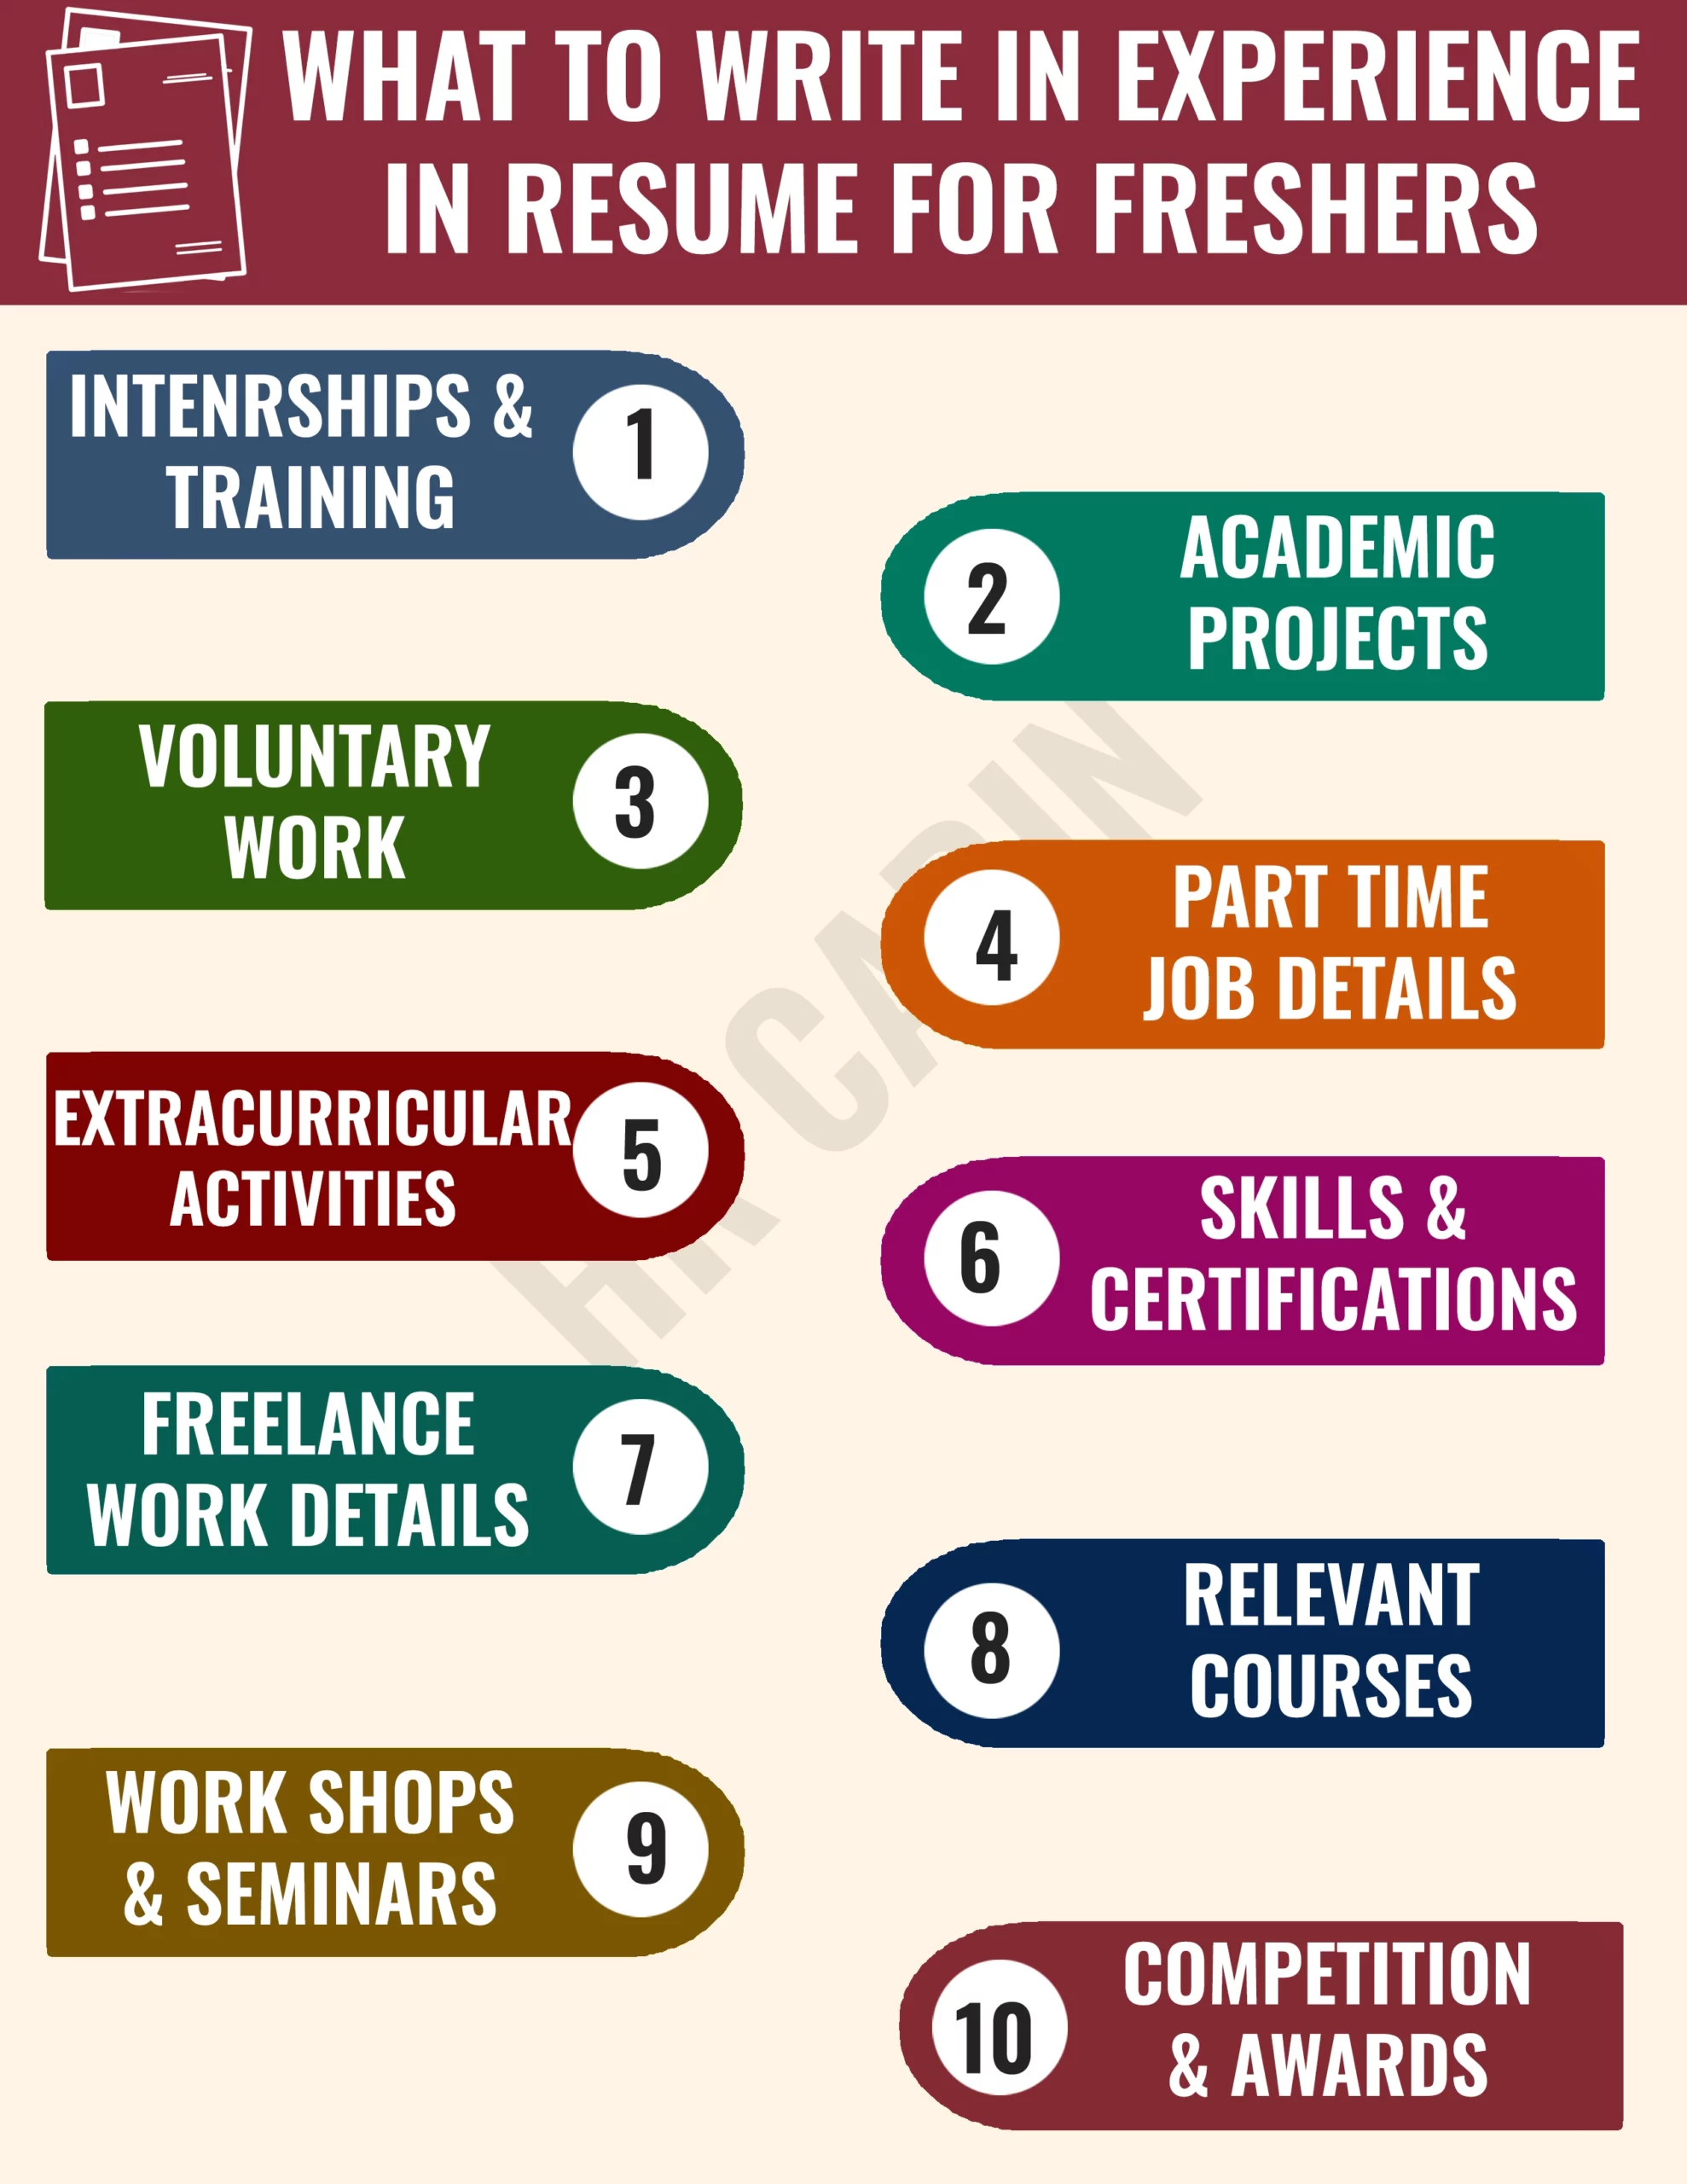 What to Write in Experience in Resume for Freshers with No Experience